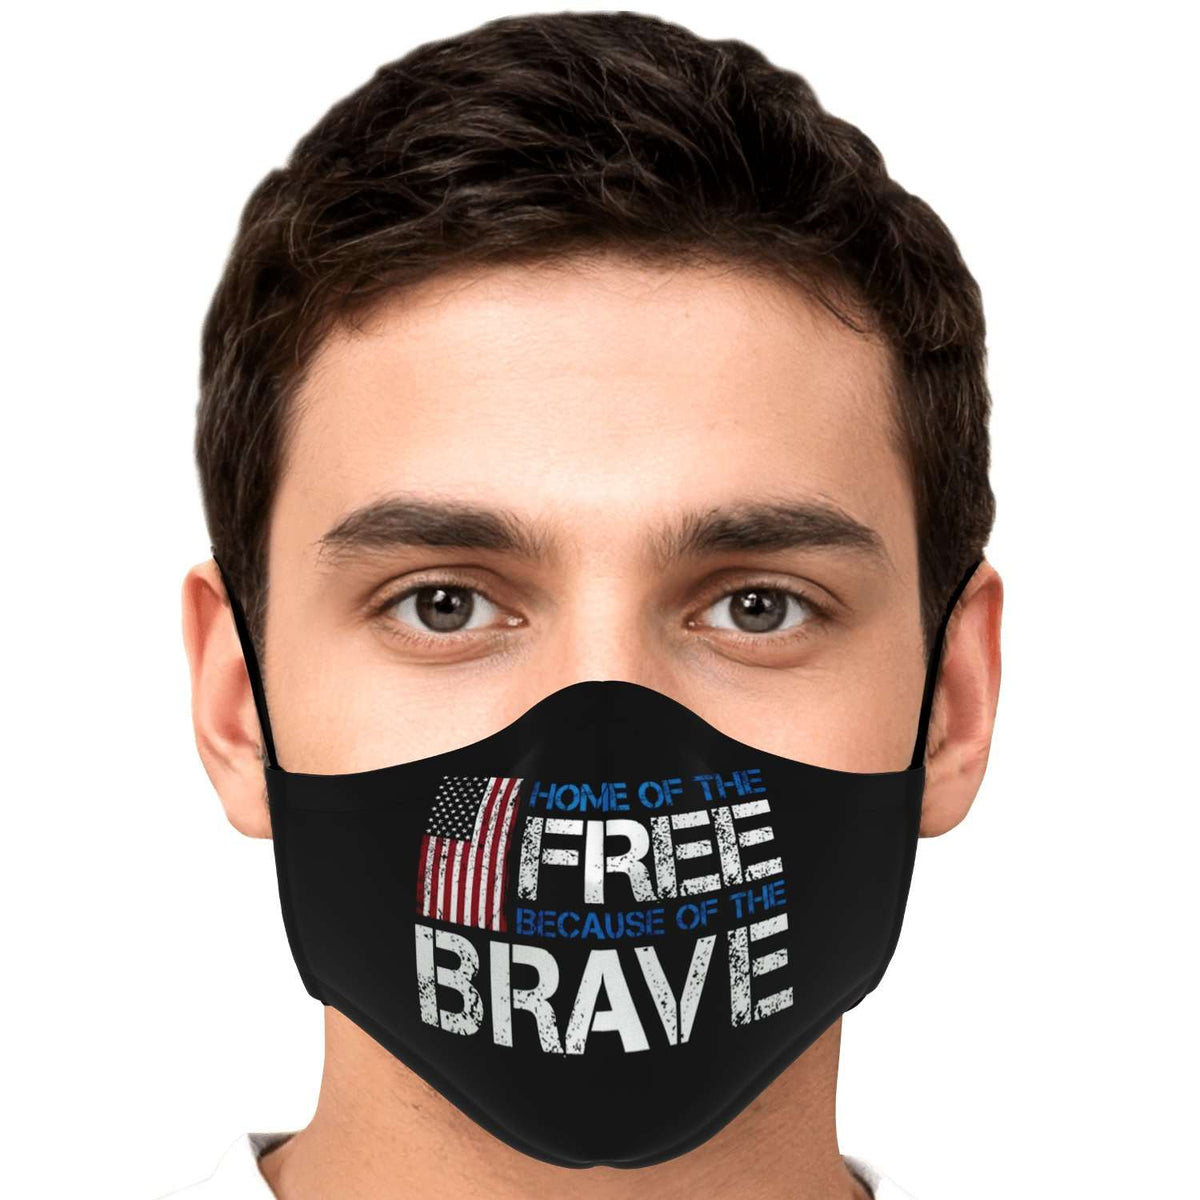 Designs by MyUtopia Shout Out:Home of The Free Because of the Brave (Flag) Fitted Face Mask w. Adjustable Ear Loops,Adult / Single / No filters,Fabric Face Mask